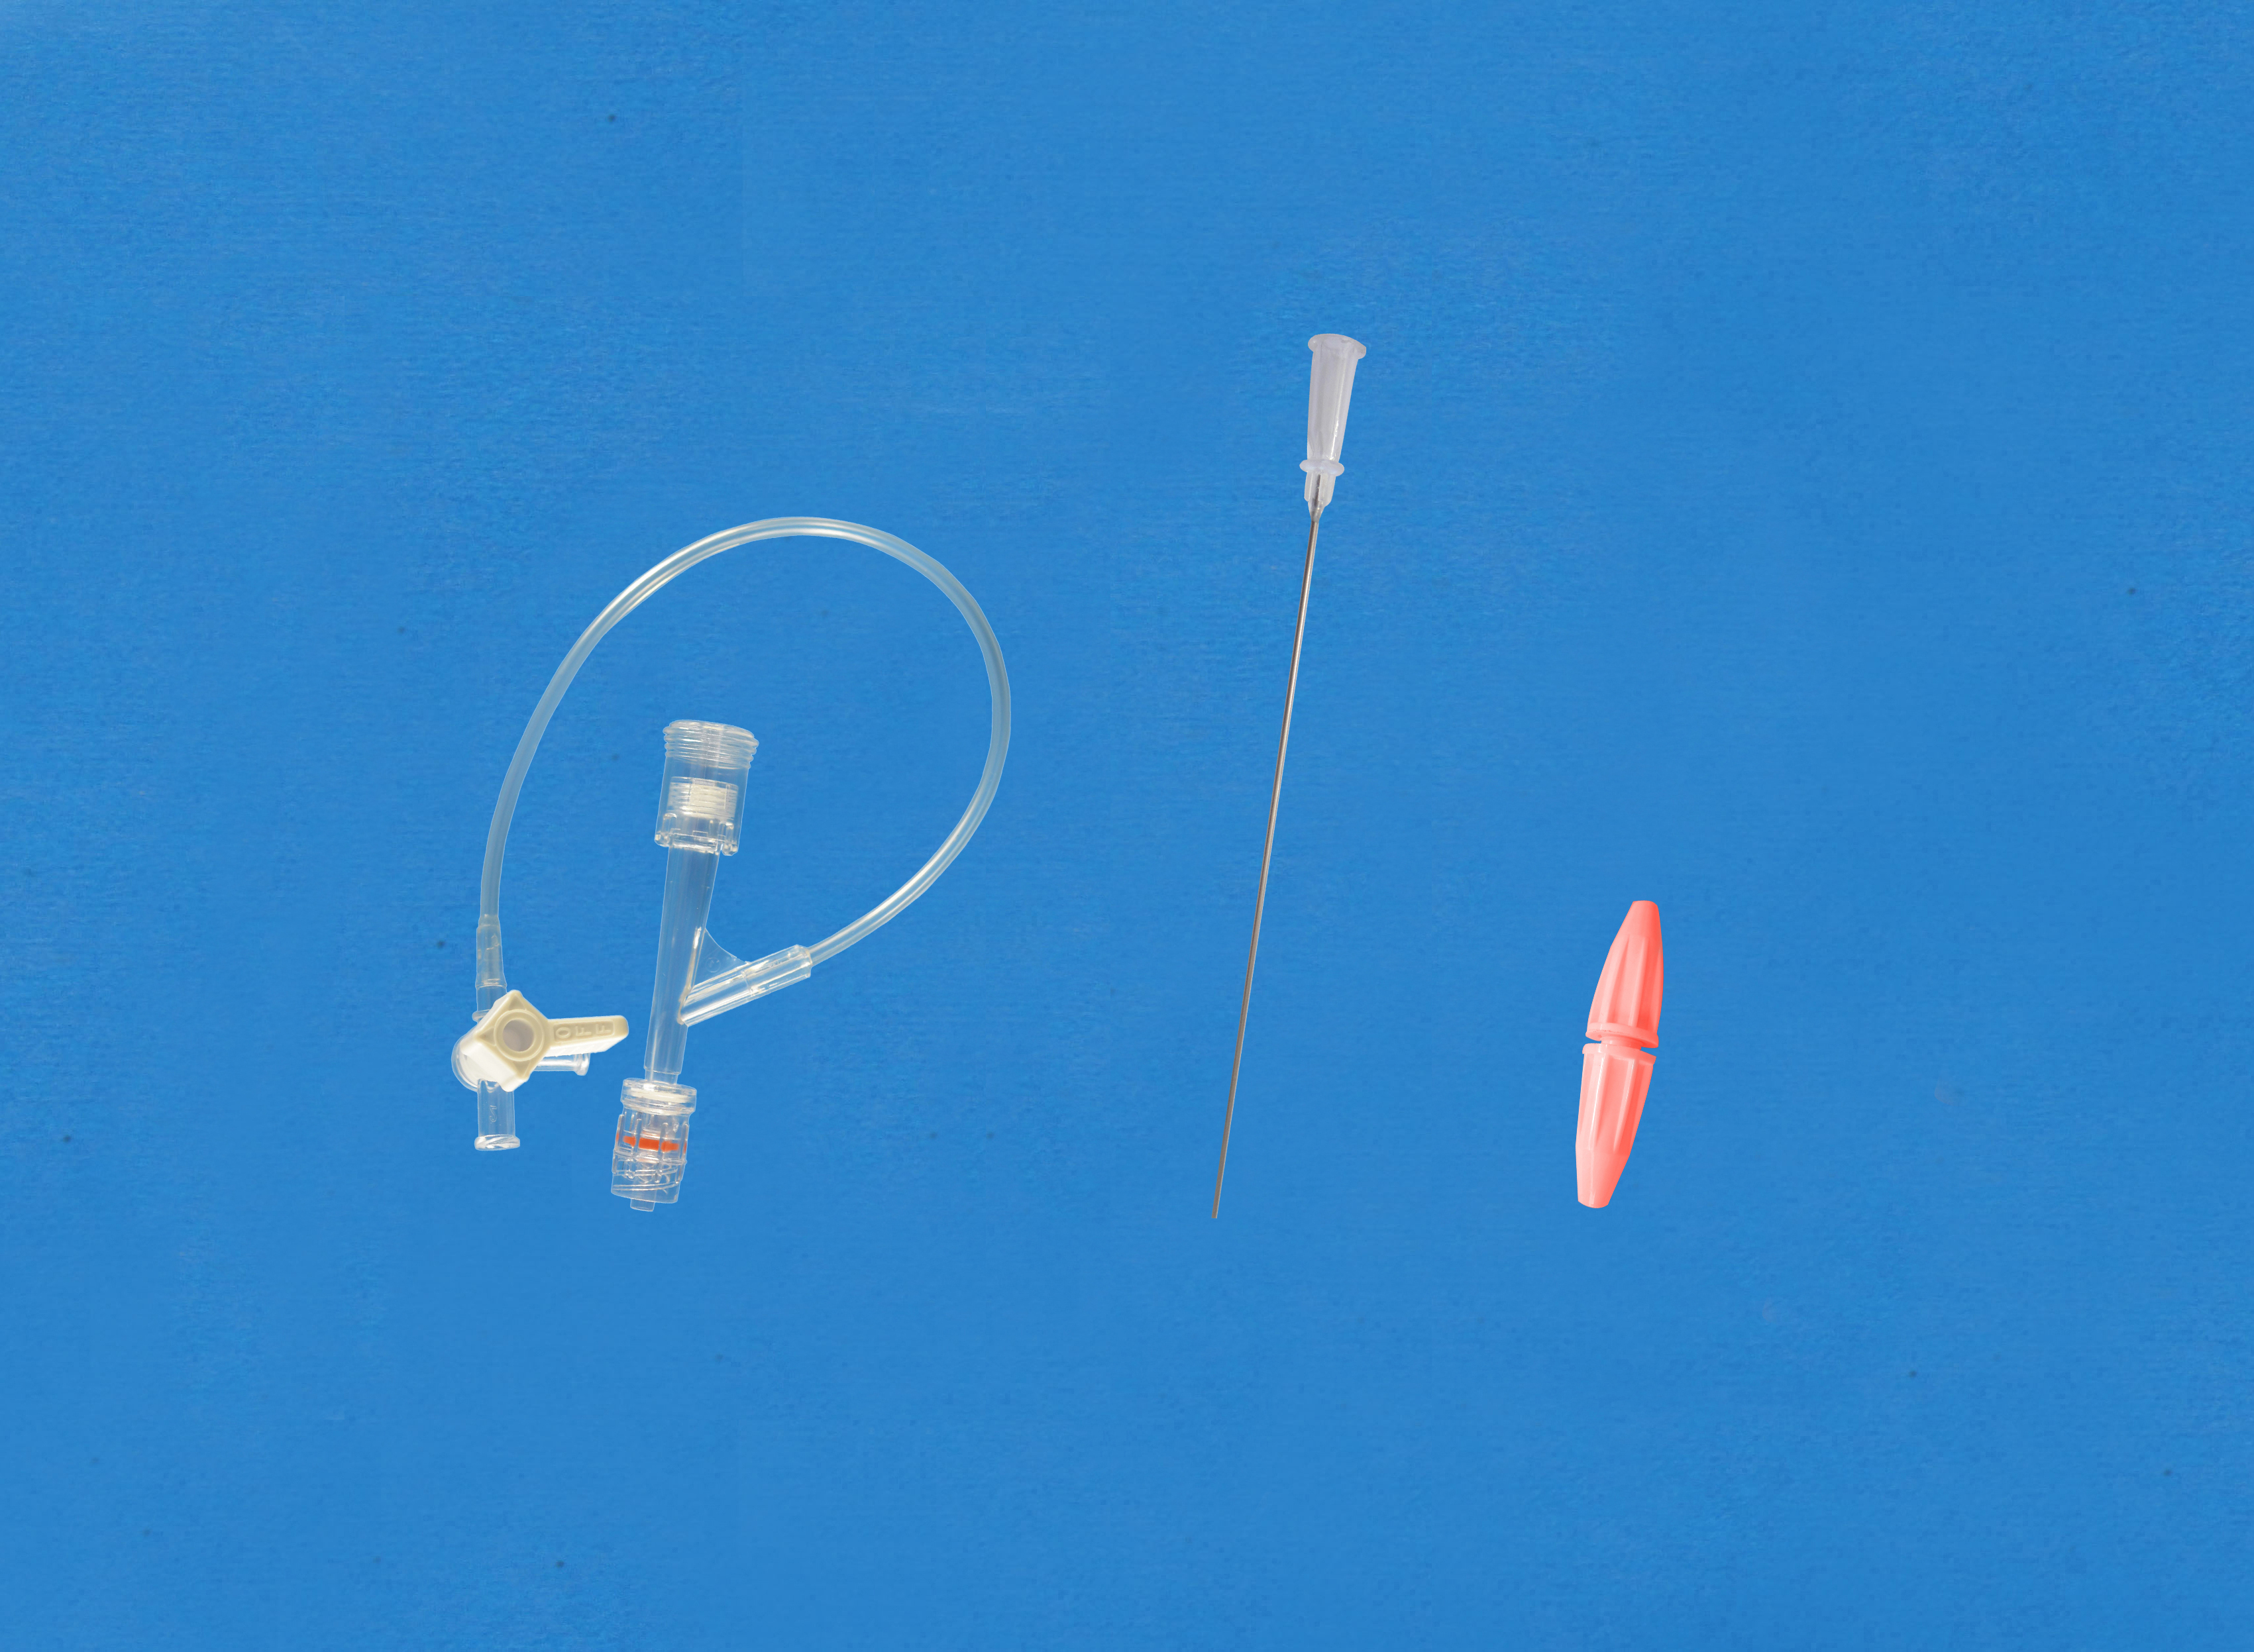 Haemostatic valves, Push-pull, Sideon Tubing and Stopcock, Insertion Tool with Small Hub, Red/Plastic Torquer